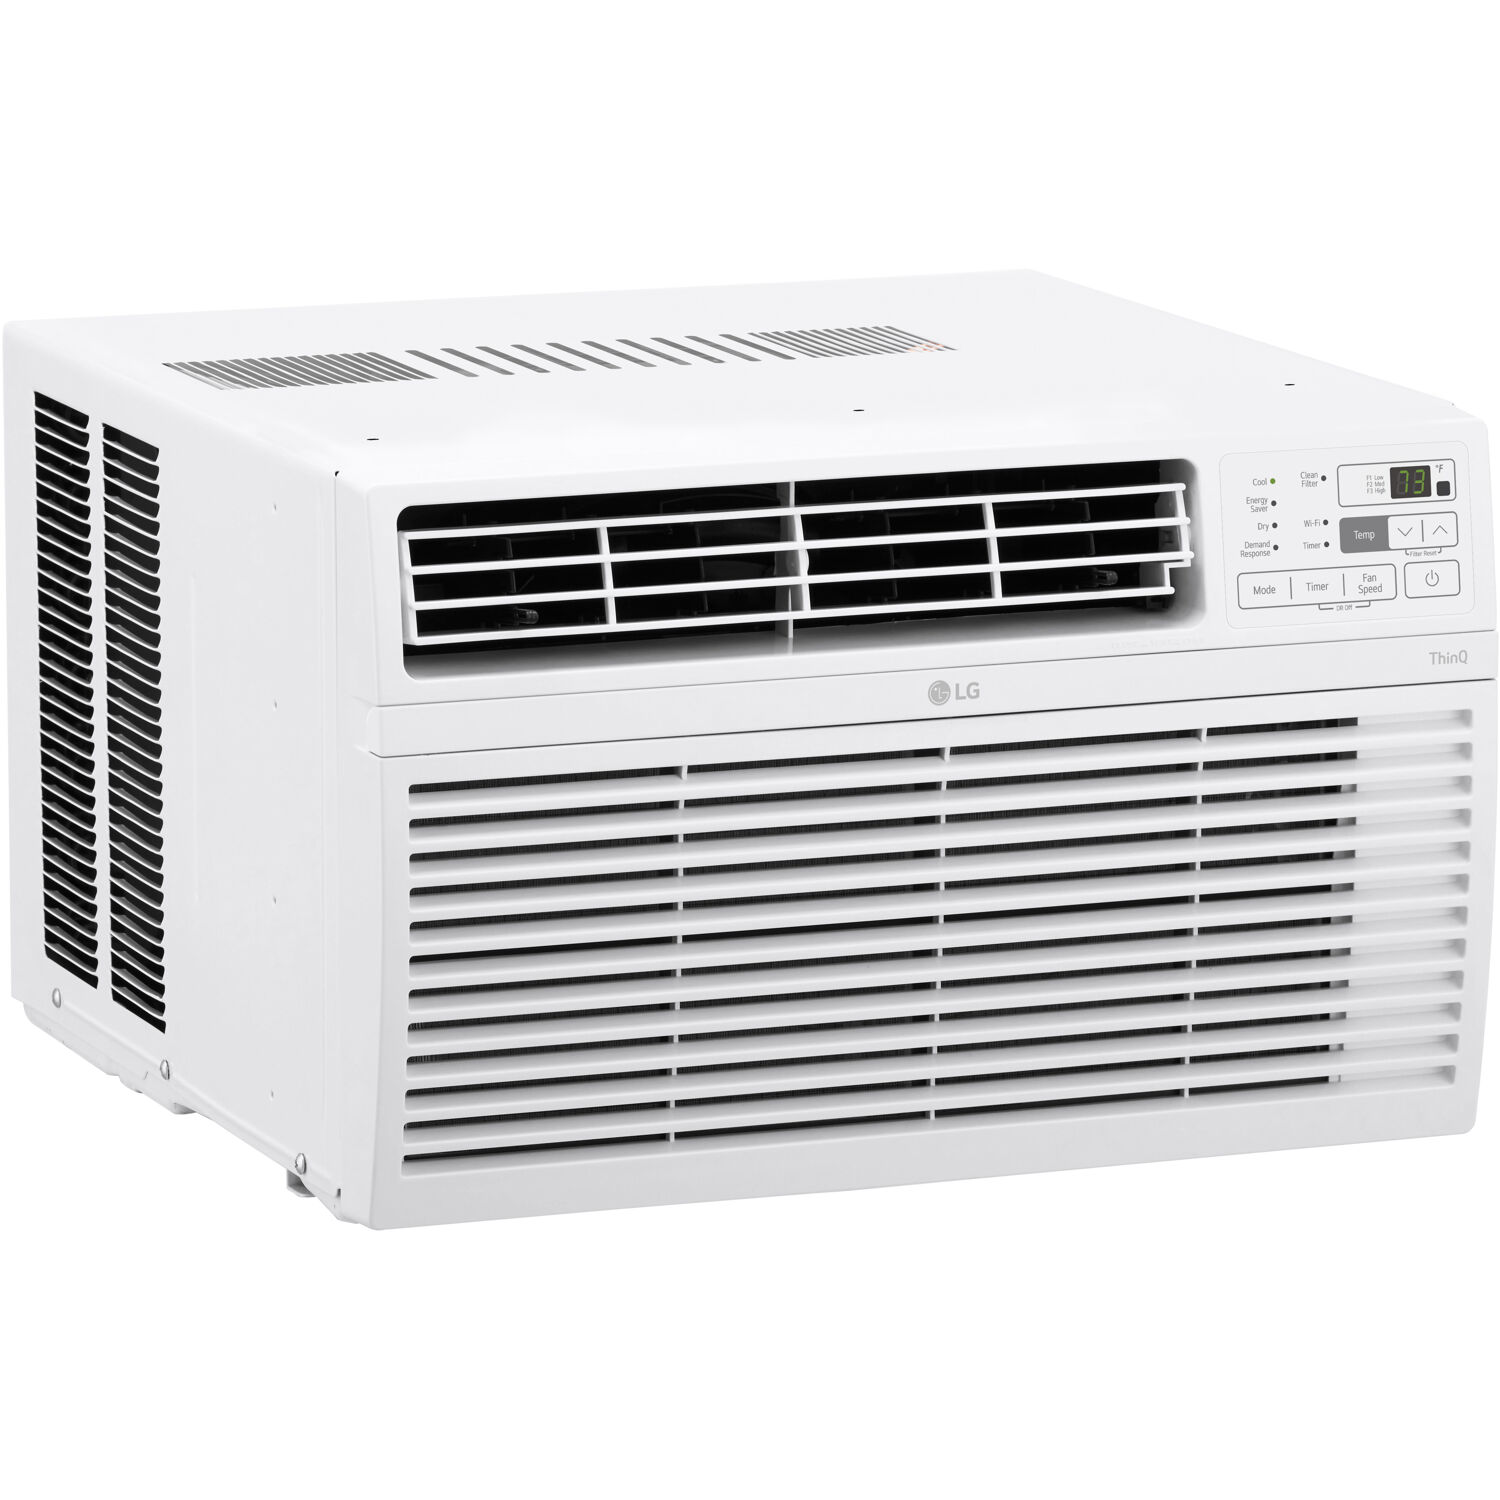 LG 8,000 BTU 115V Window-Mounted Air Conditioner with Wi-Fi Control - image 2 of 11